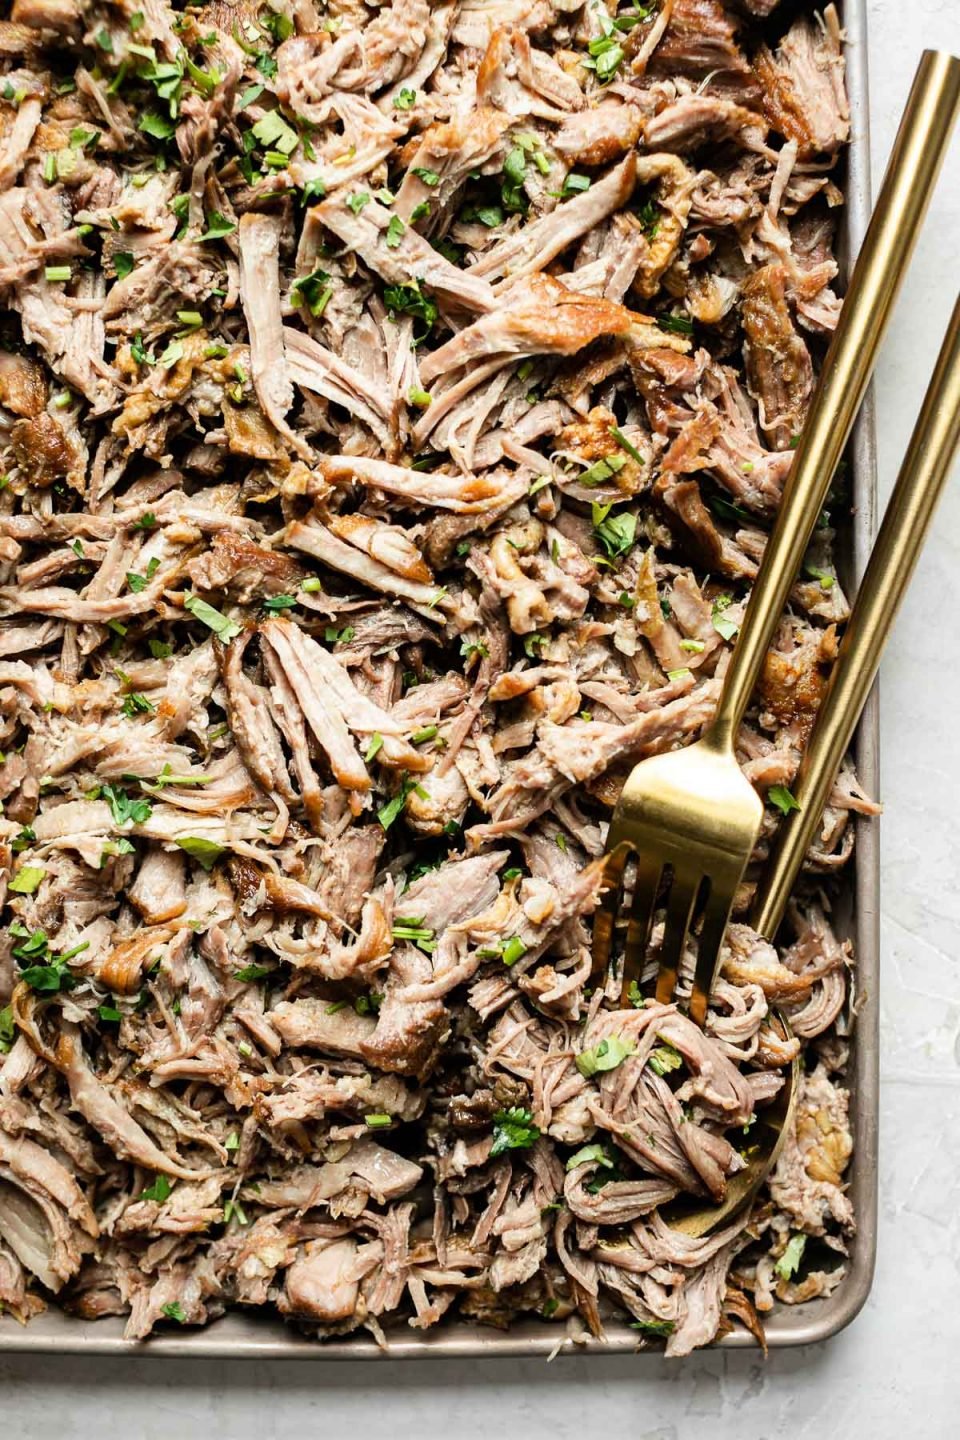 Close up of shredded kalua pork on a small baking sheet, topped with cilantro. A gold serving fork & spoon are nestled in the pork.